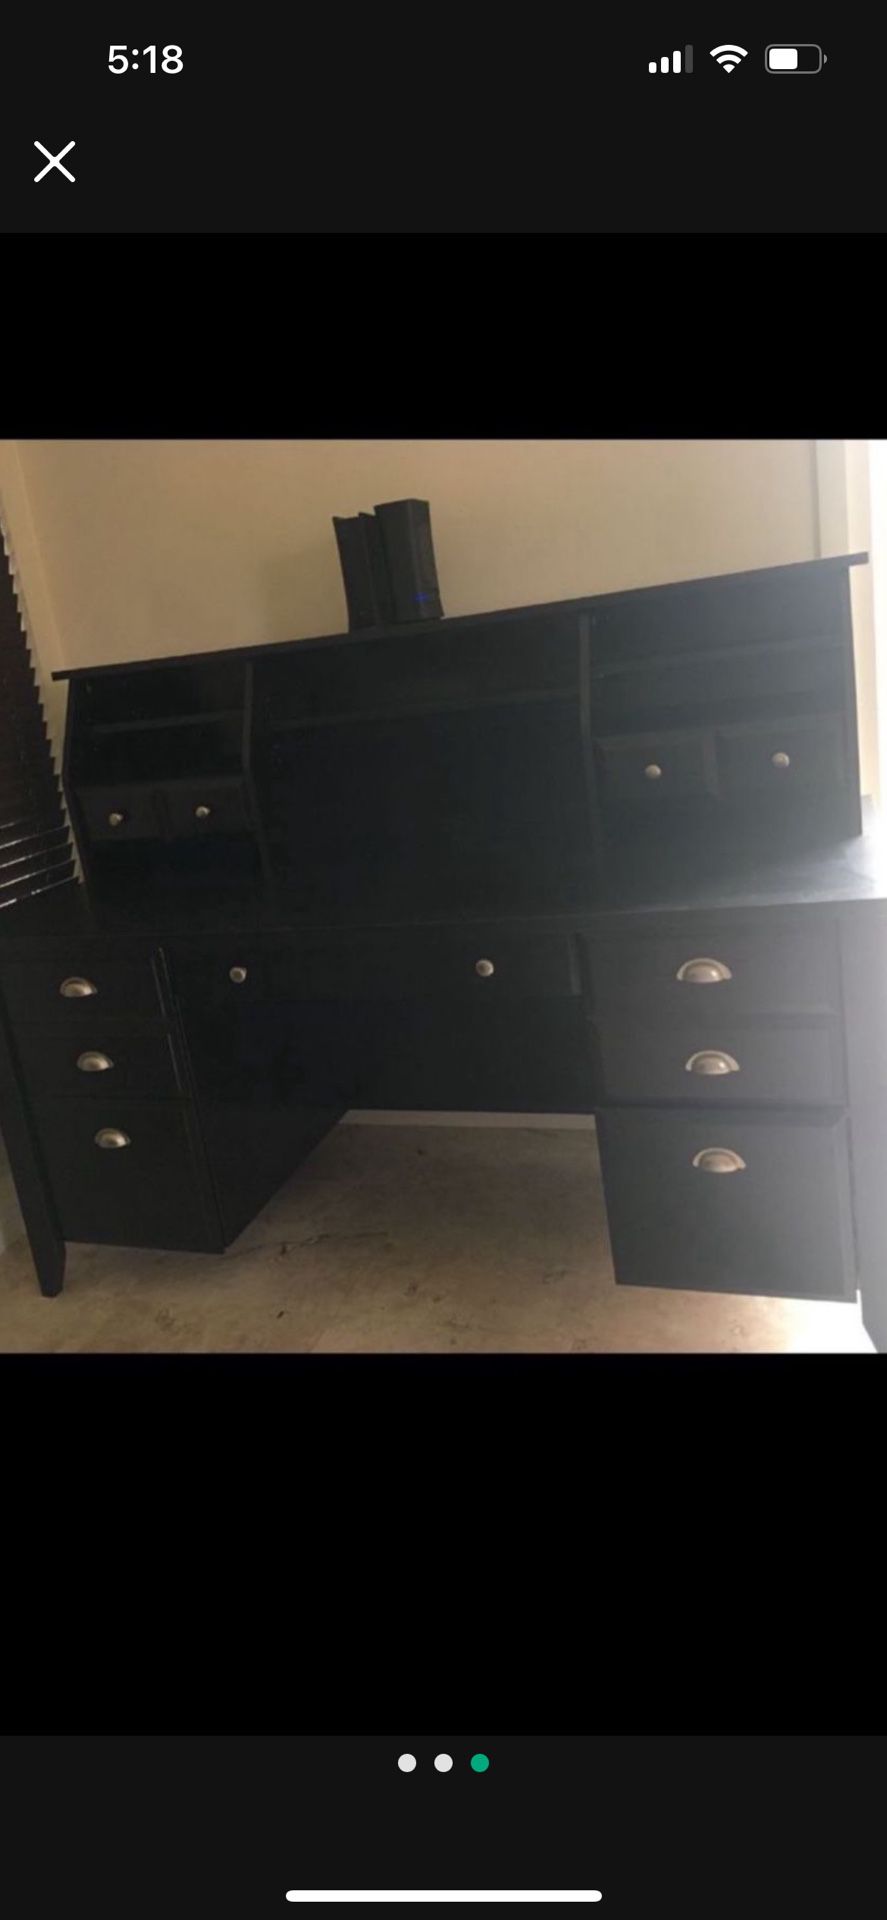 2 Piece Desk With Drawers Must Be Picked Up In San Diego